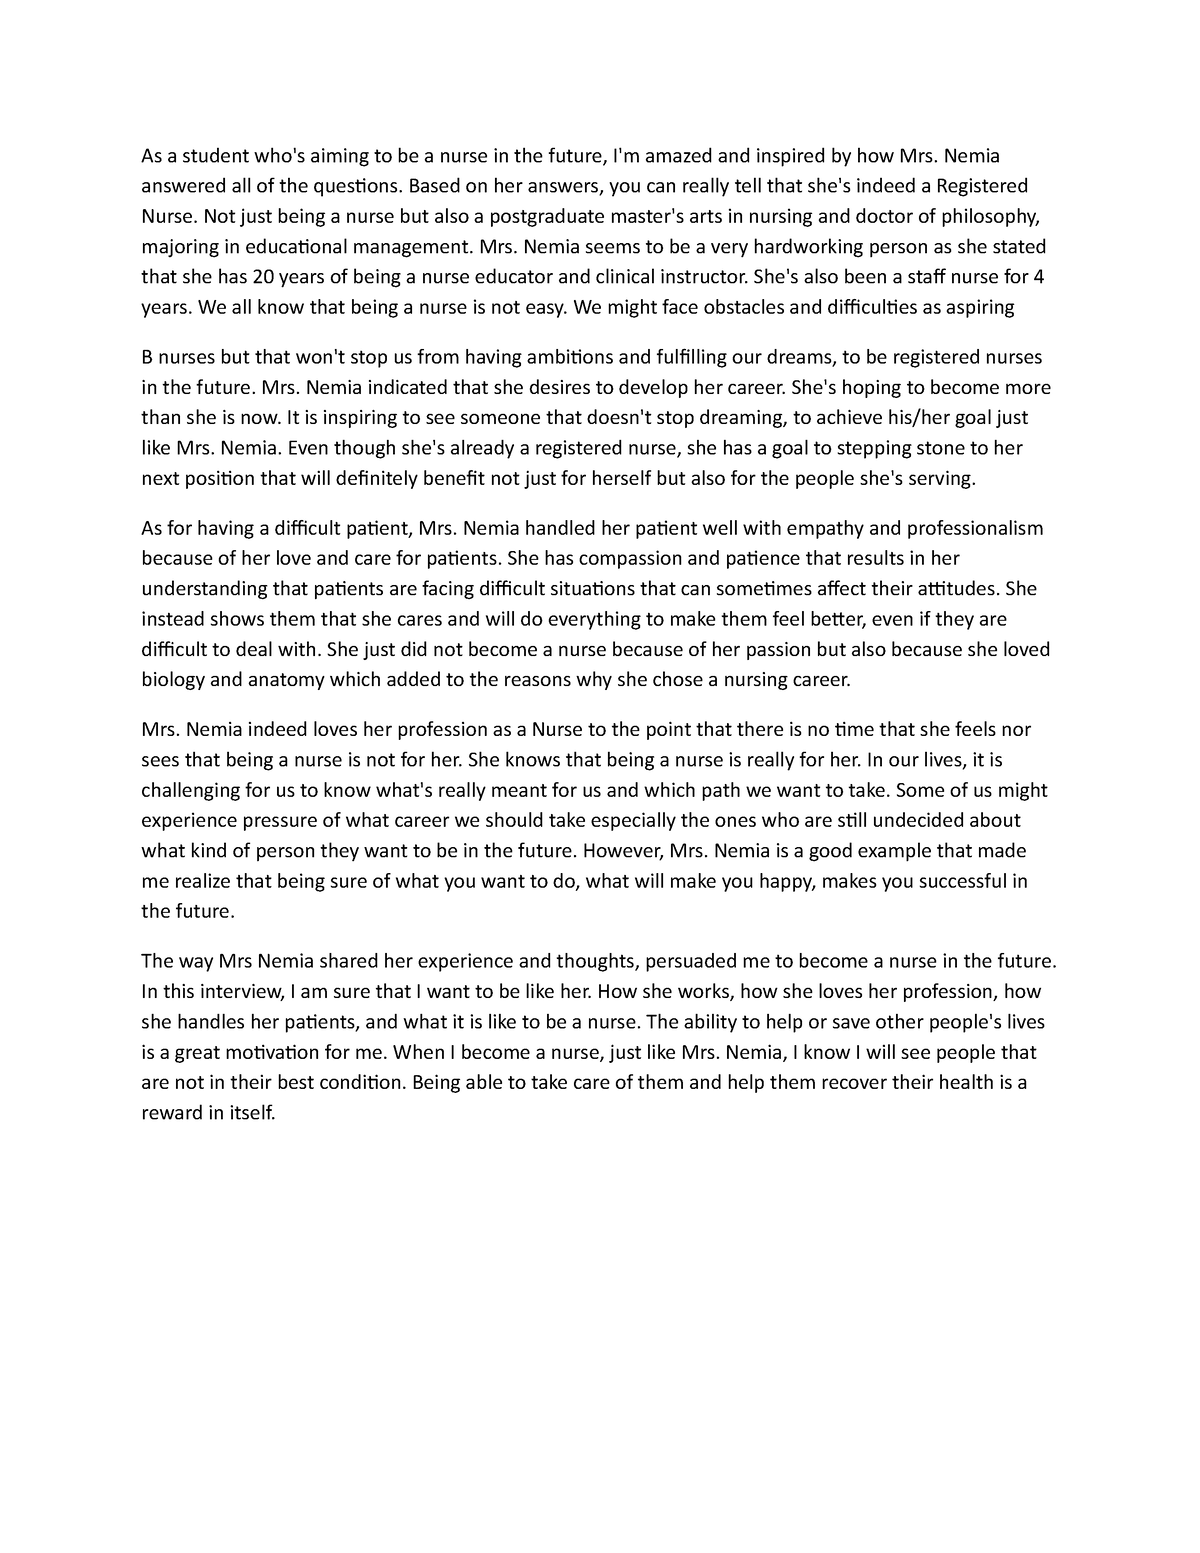 Reflective essay in work immersion - As a student who's aiming to be a ...